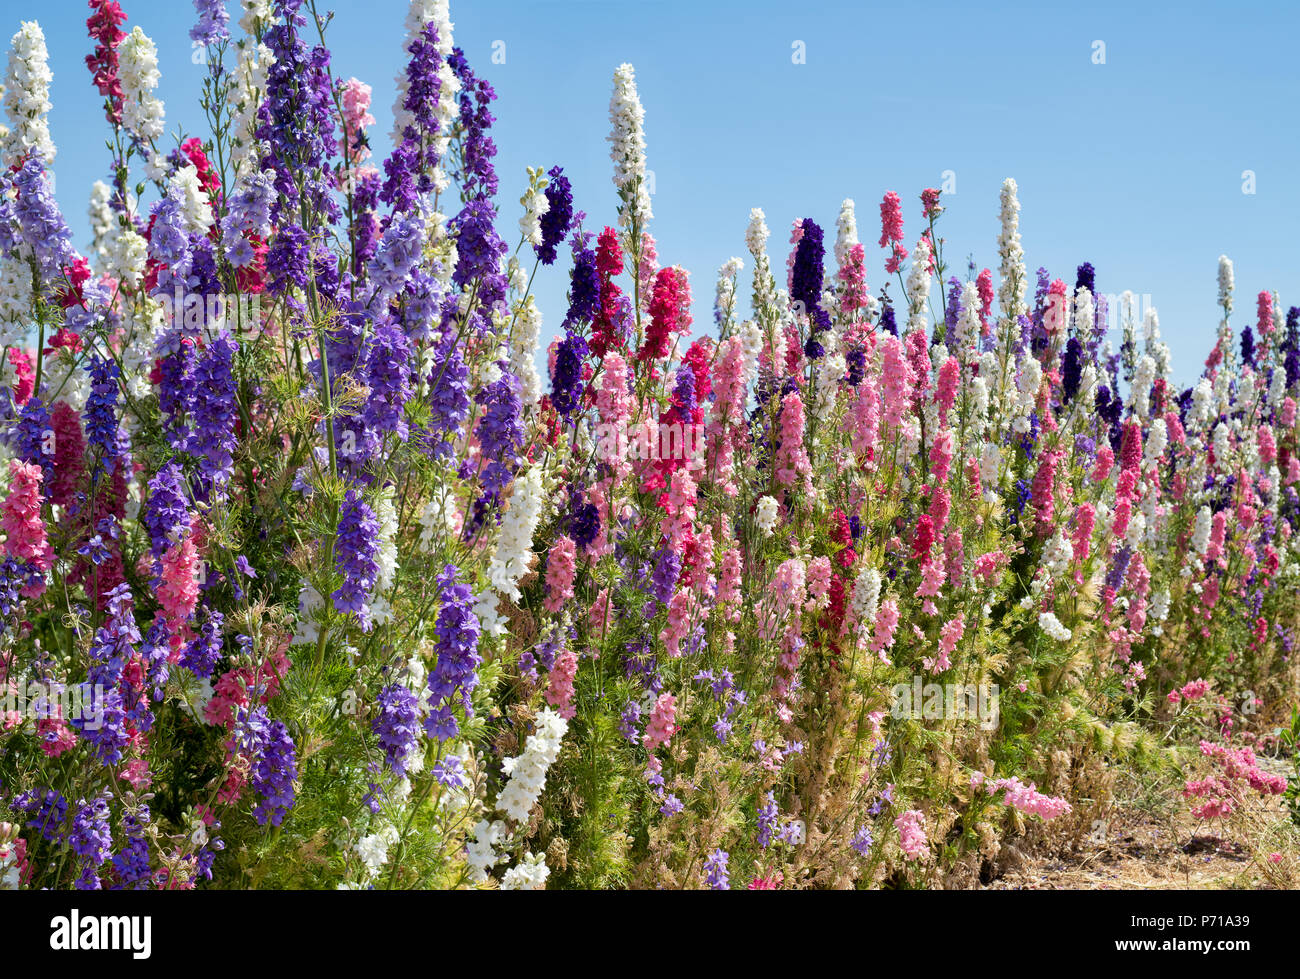 Delphinium grown in a field at the Real Flower Petal Confetti company flower fields in Wick, Pershore, Worcestershire. UK Stock Photo